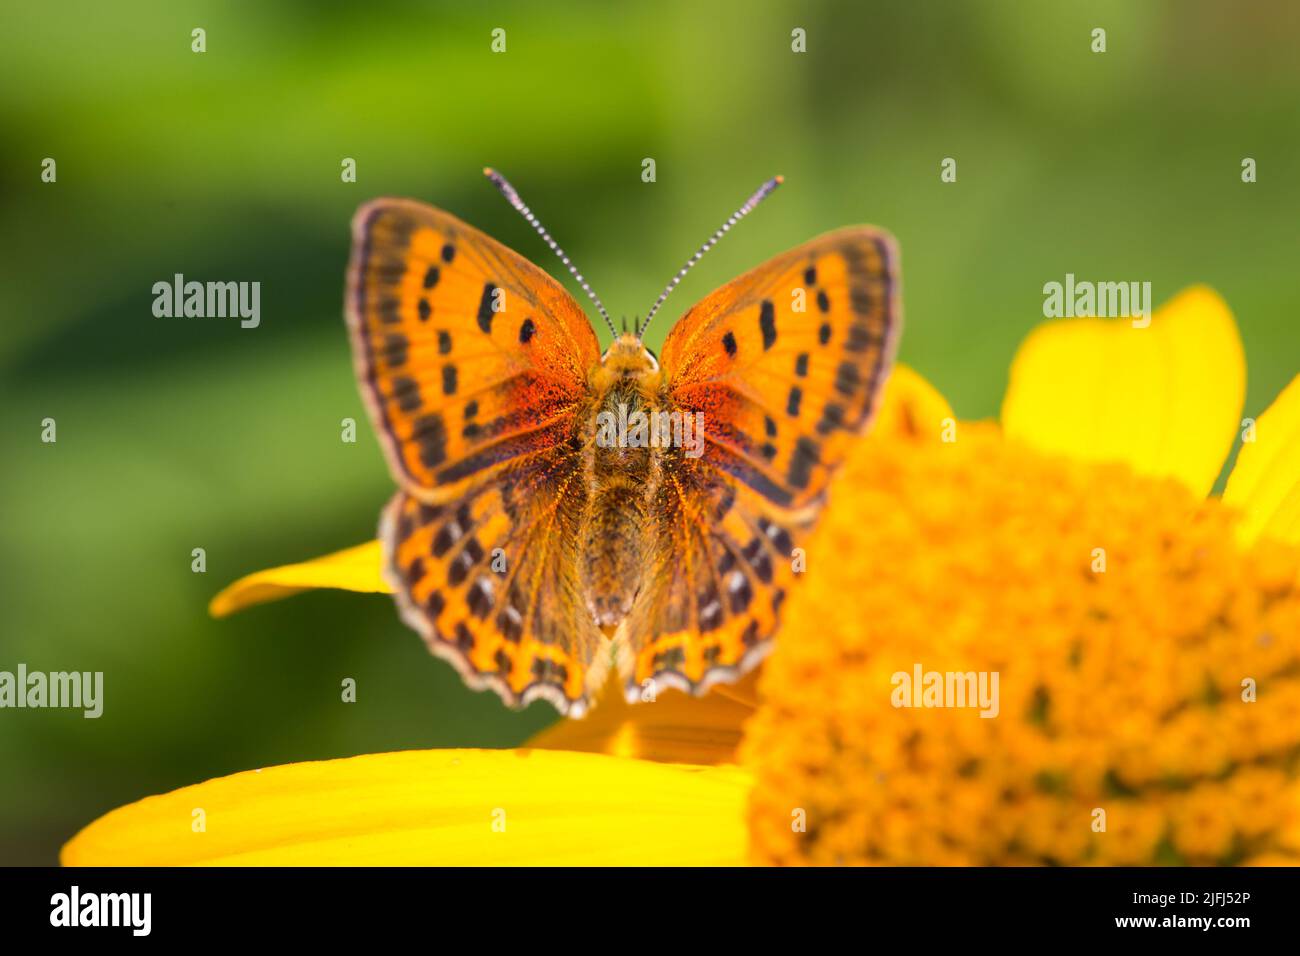 Orange butterfly with black spots (Lepidoptera) Stock Photo